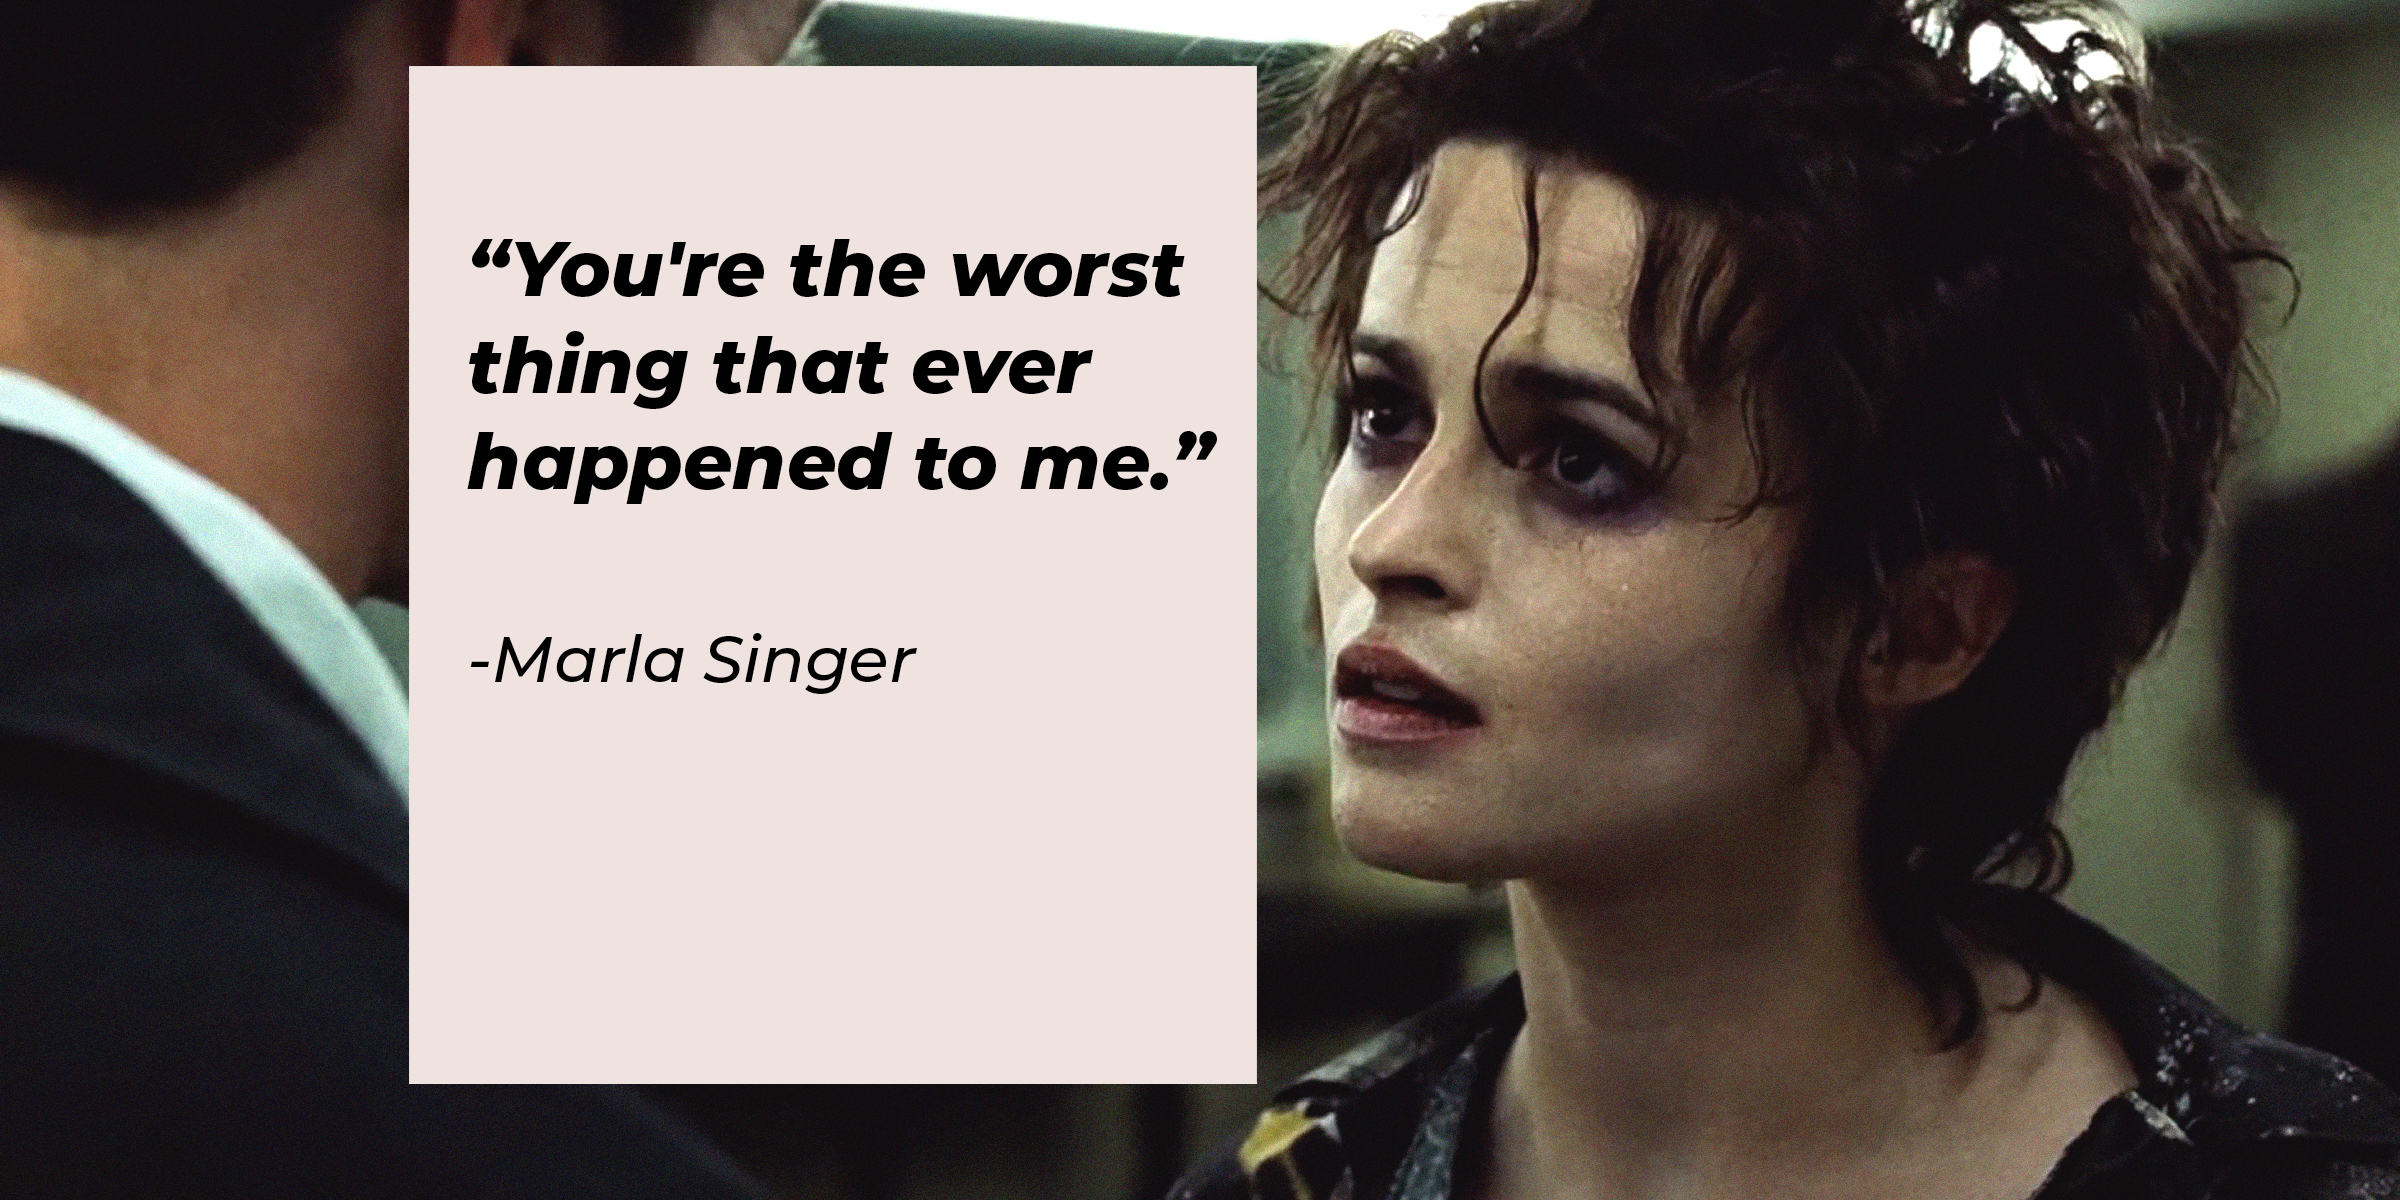 An image of Marla Singer with her quote: “You are the worst thing that ever happened to me.”| Image: facebook.com/FightClub